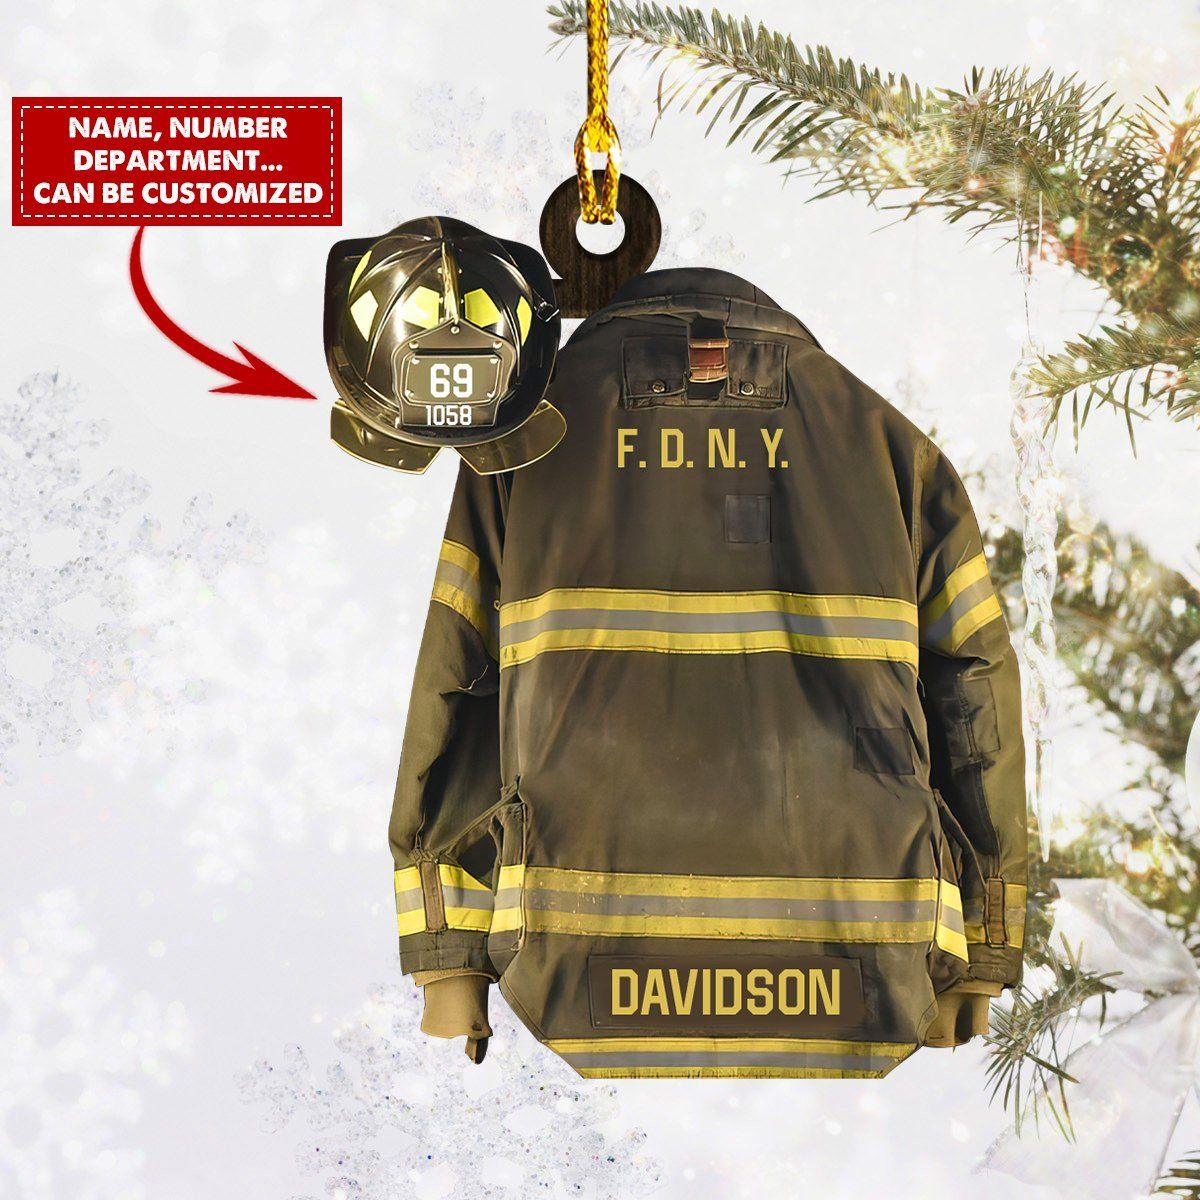 giftngon - Personalized Firefighter Christmas Ornament | Custom Shaped Ornament | Custom Name & Number New V2